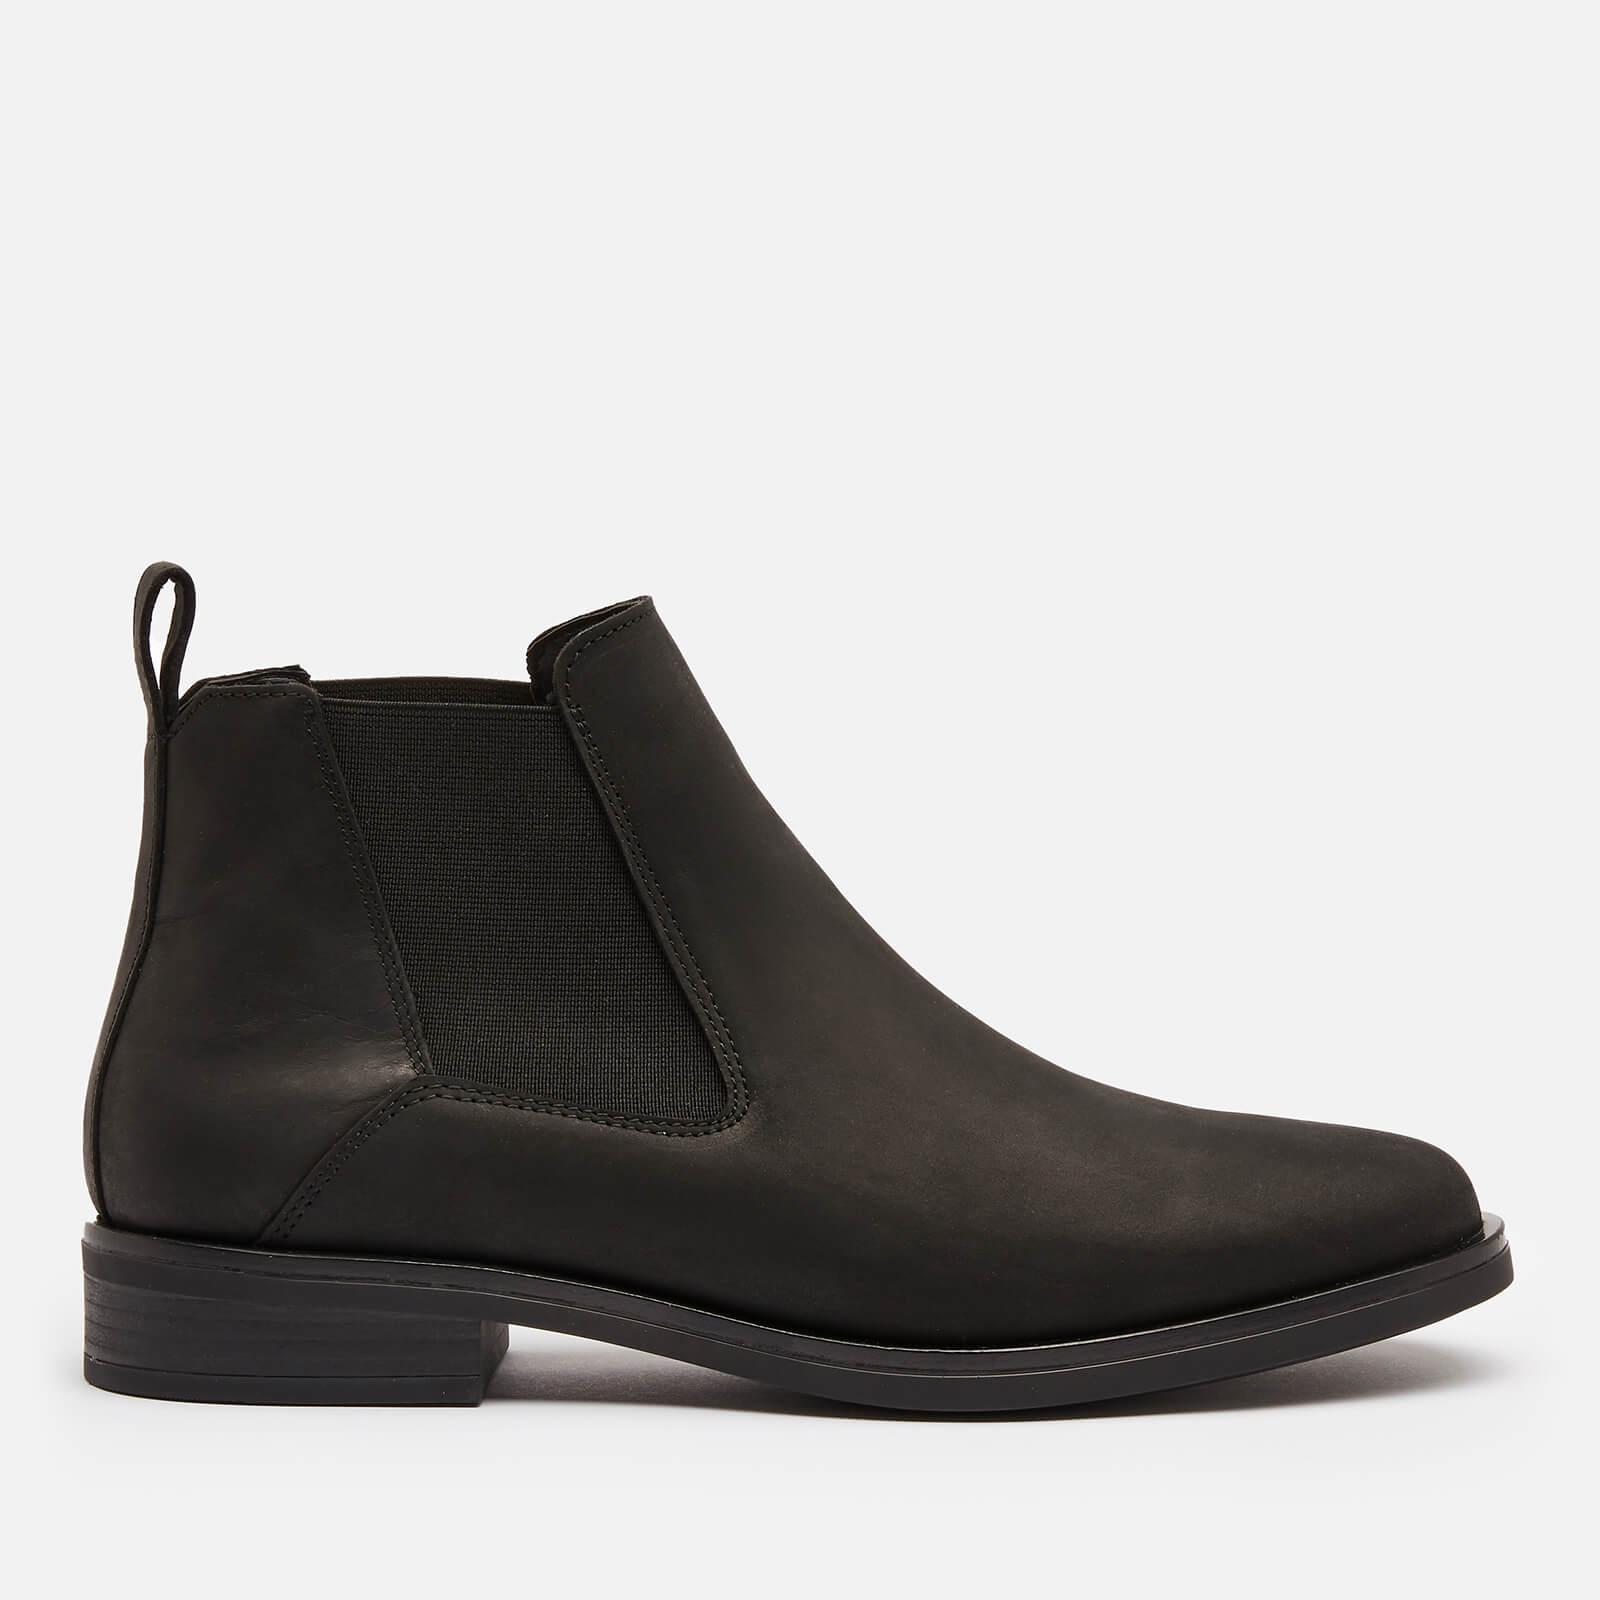 Clarks Memi Top Leather Chelsea Boots in Black | Lyst